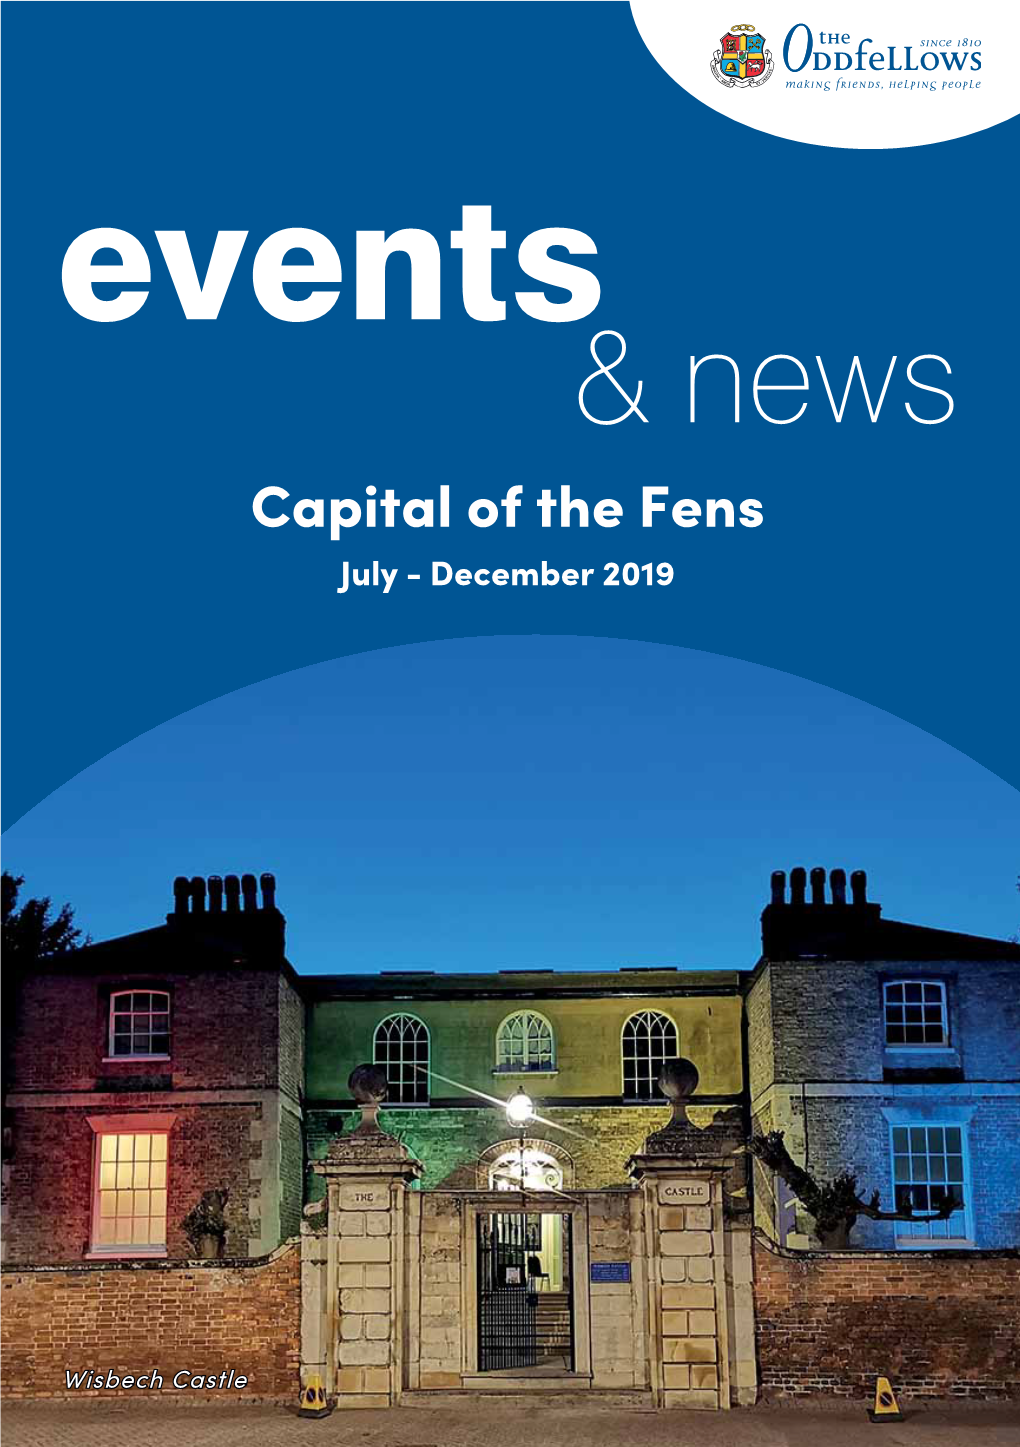 Capital of the Fens July - December 2019